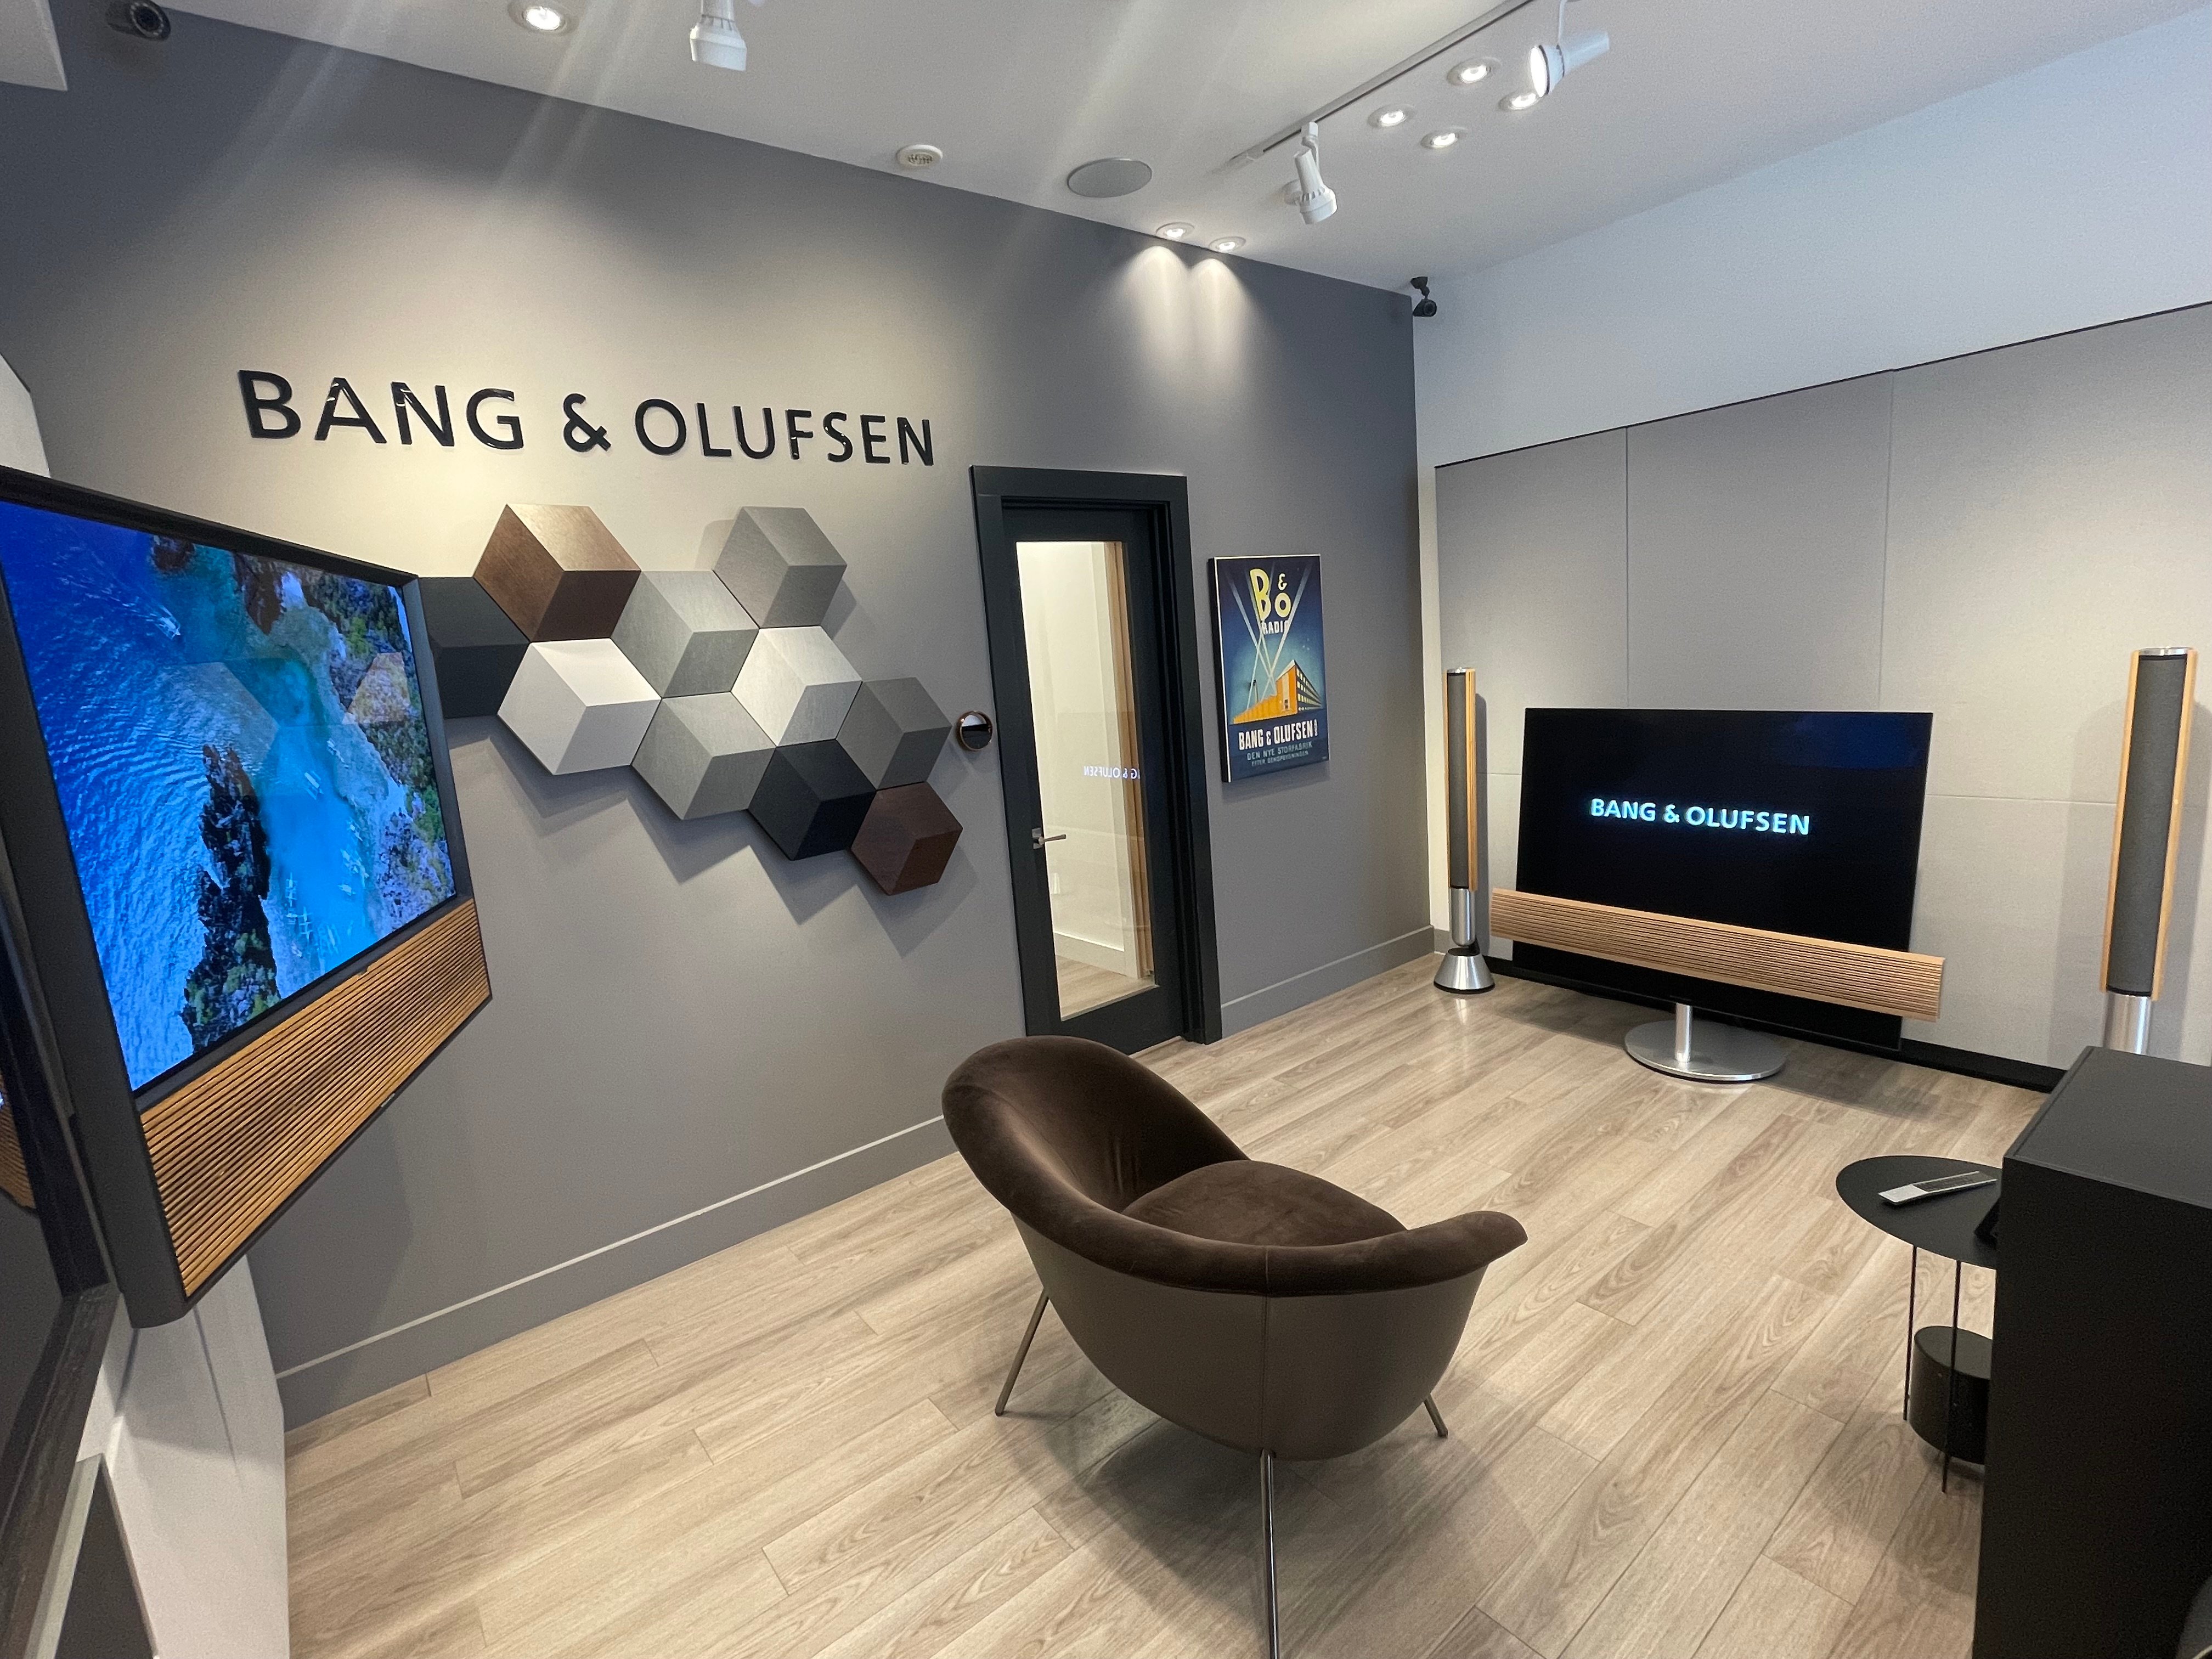 Bang & Olufsen : Luxury home sound systems in Boston